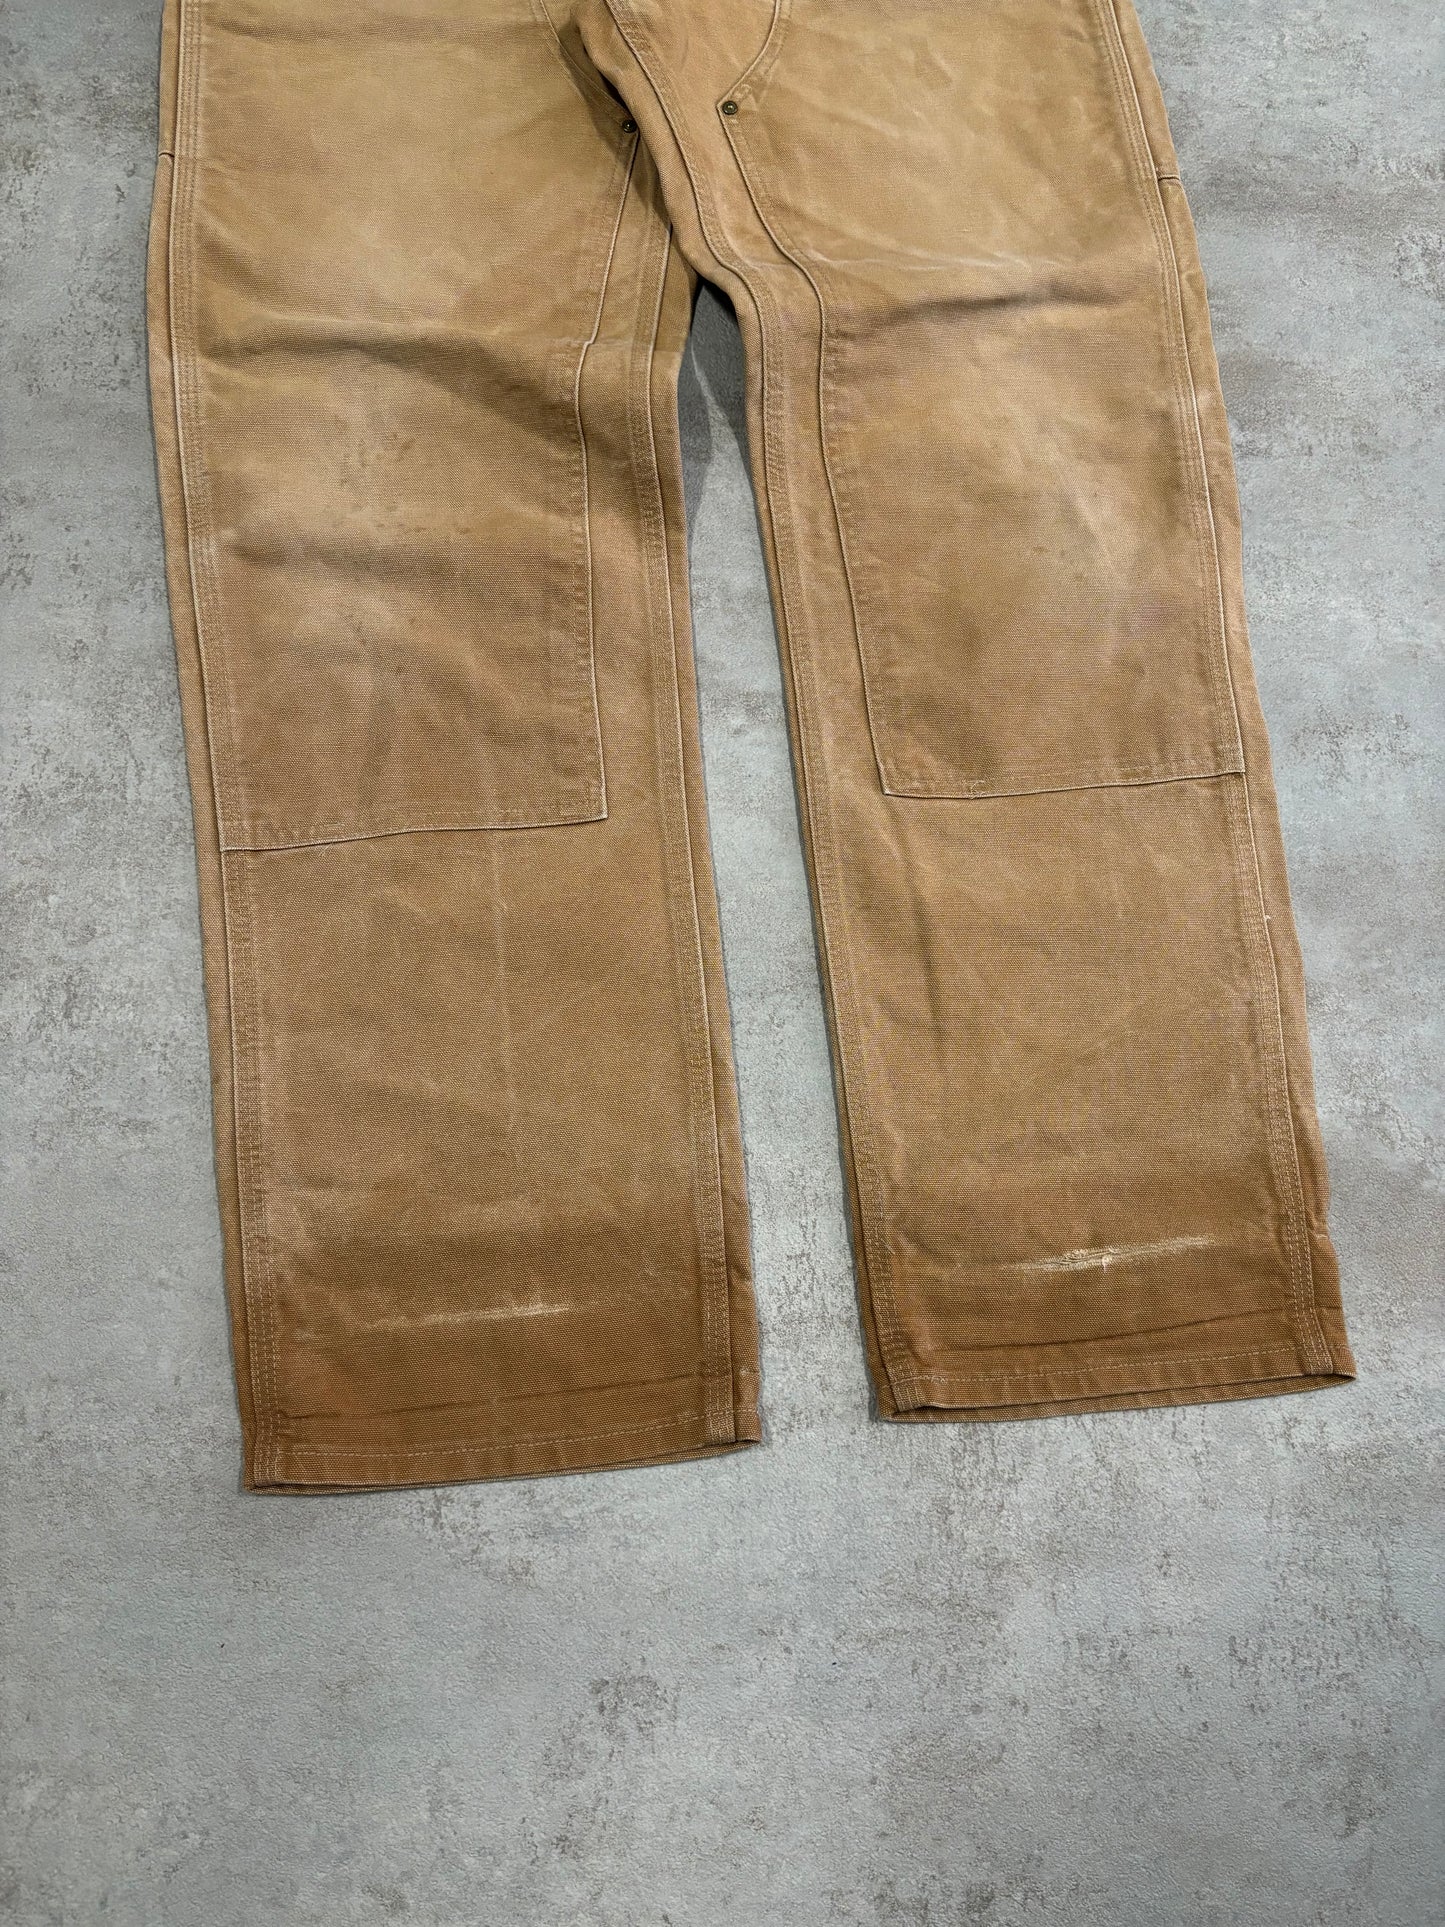 Carhartt 'Double Knee' 90s Vintage 'Stained' Pants - XL